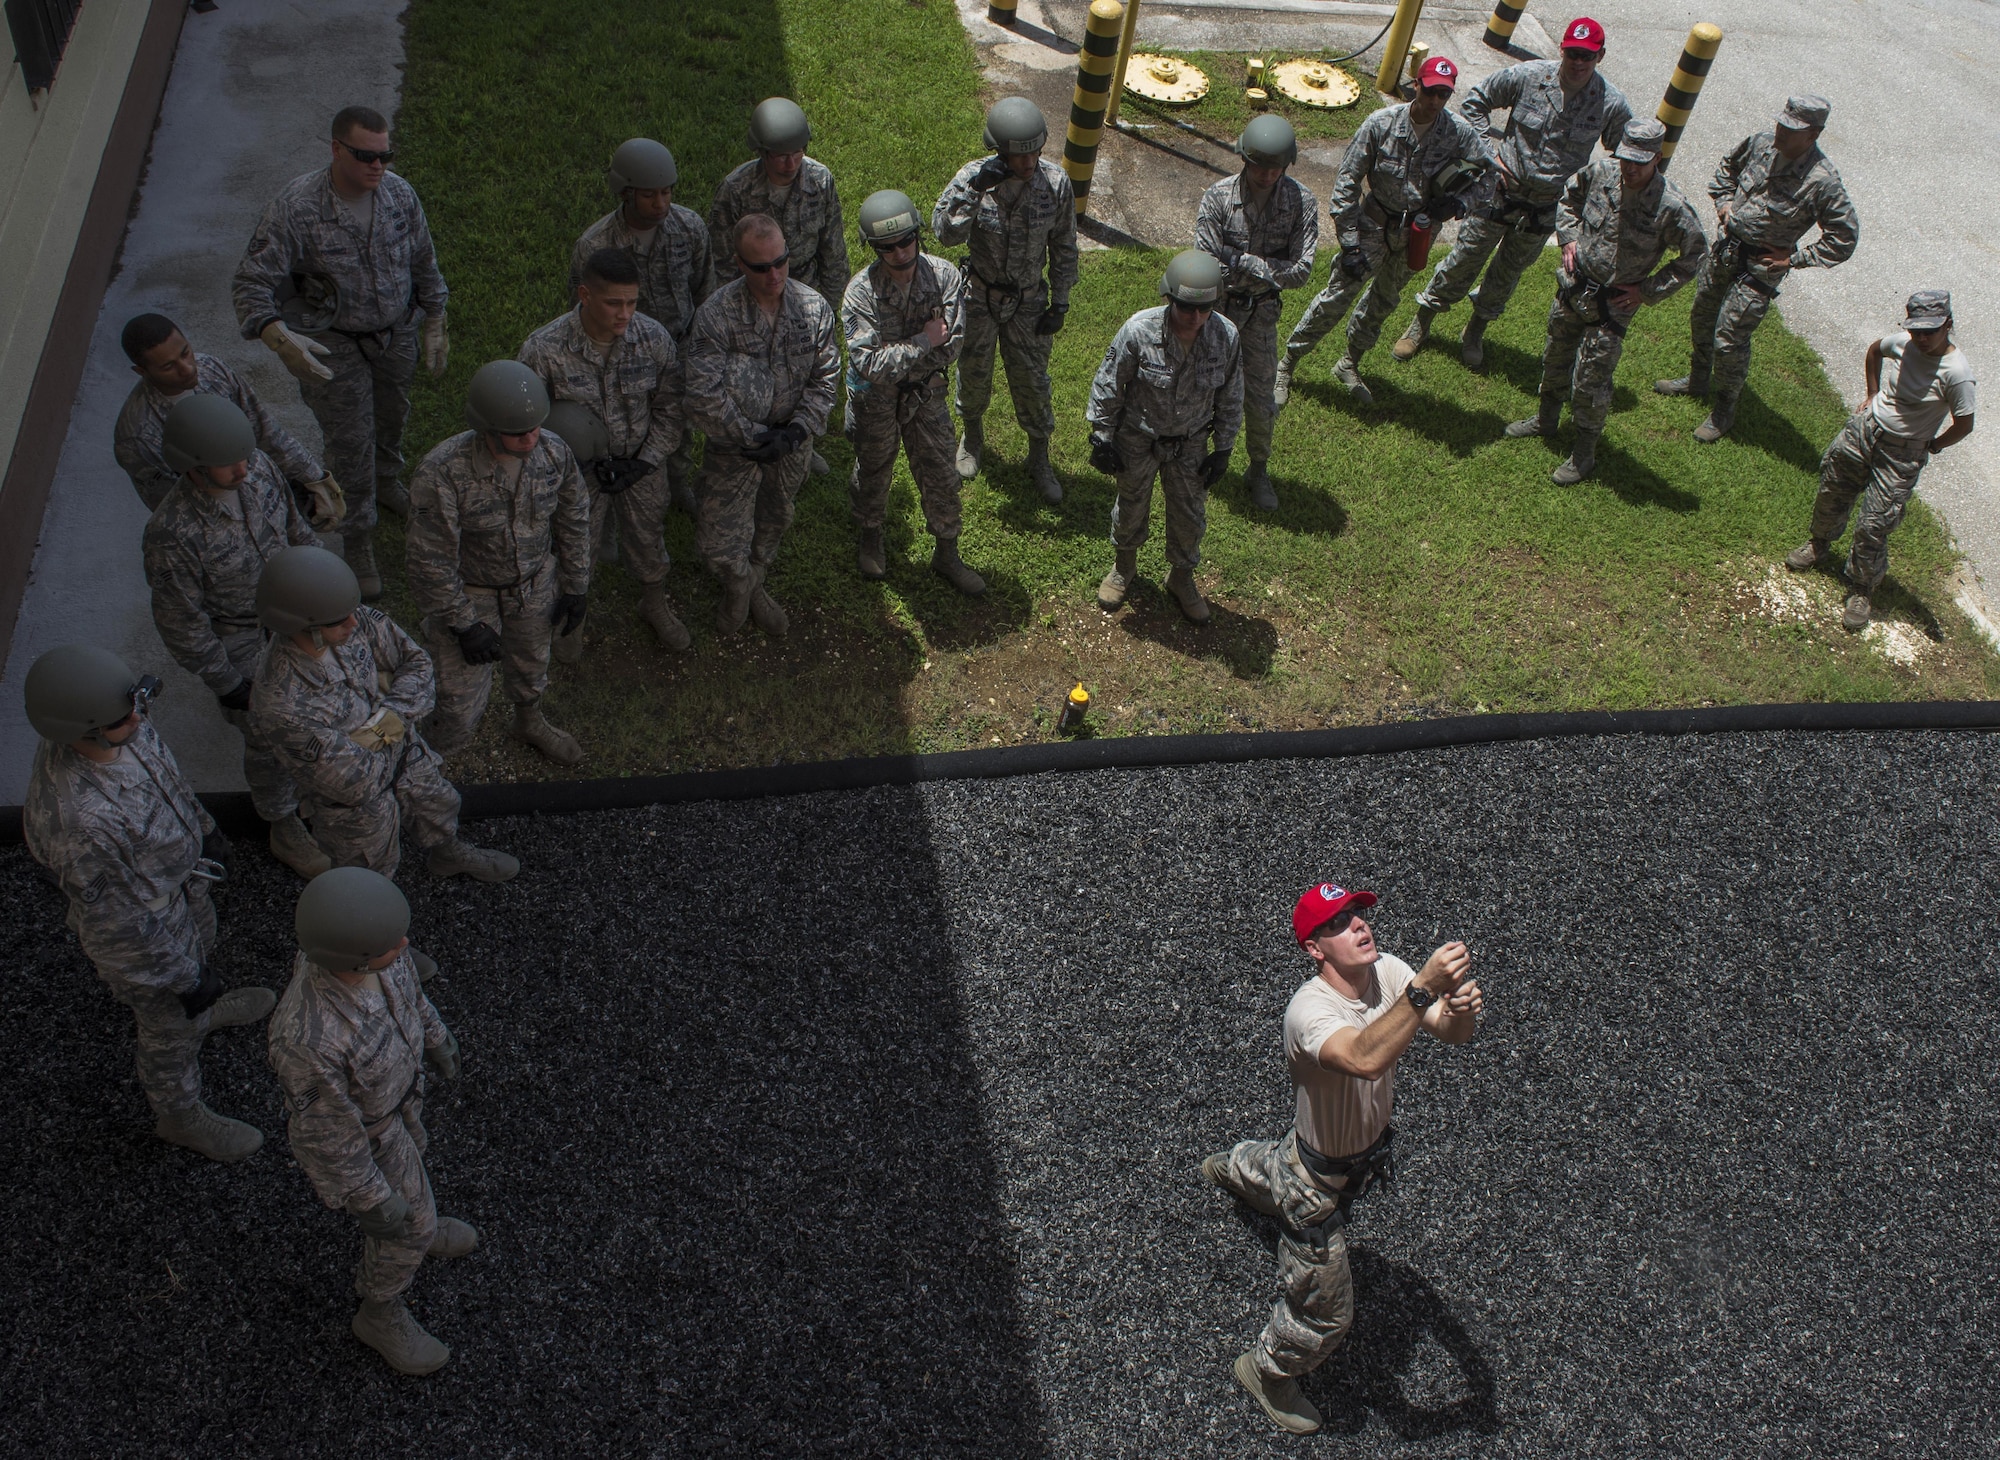 Staff Sgt. Joshua Krahenbuhl, 554th RED HORSE Squadron team NCO in charge, briefs belaying safety procedures before training Aug. 9, 2016, at Naval Base Guam. The purpose of the rappel training was to provide real-world training for 554th RHS members. RED HORSE units provide a highly responsive force to support contingency, peacetime and humanitarian operations world-wide. (U.S. Air Force photo by/Master Sgt. JT May III)